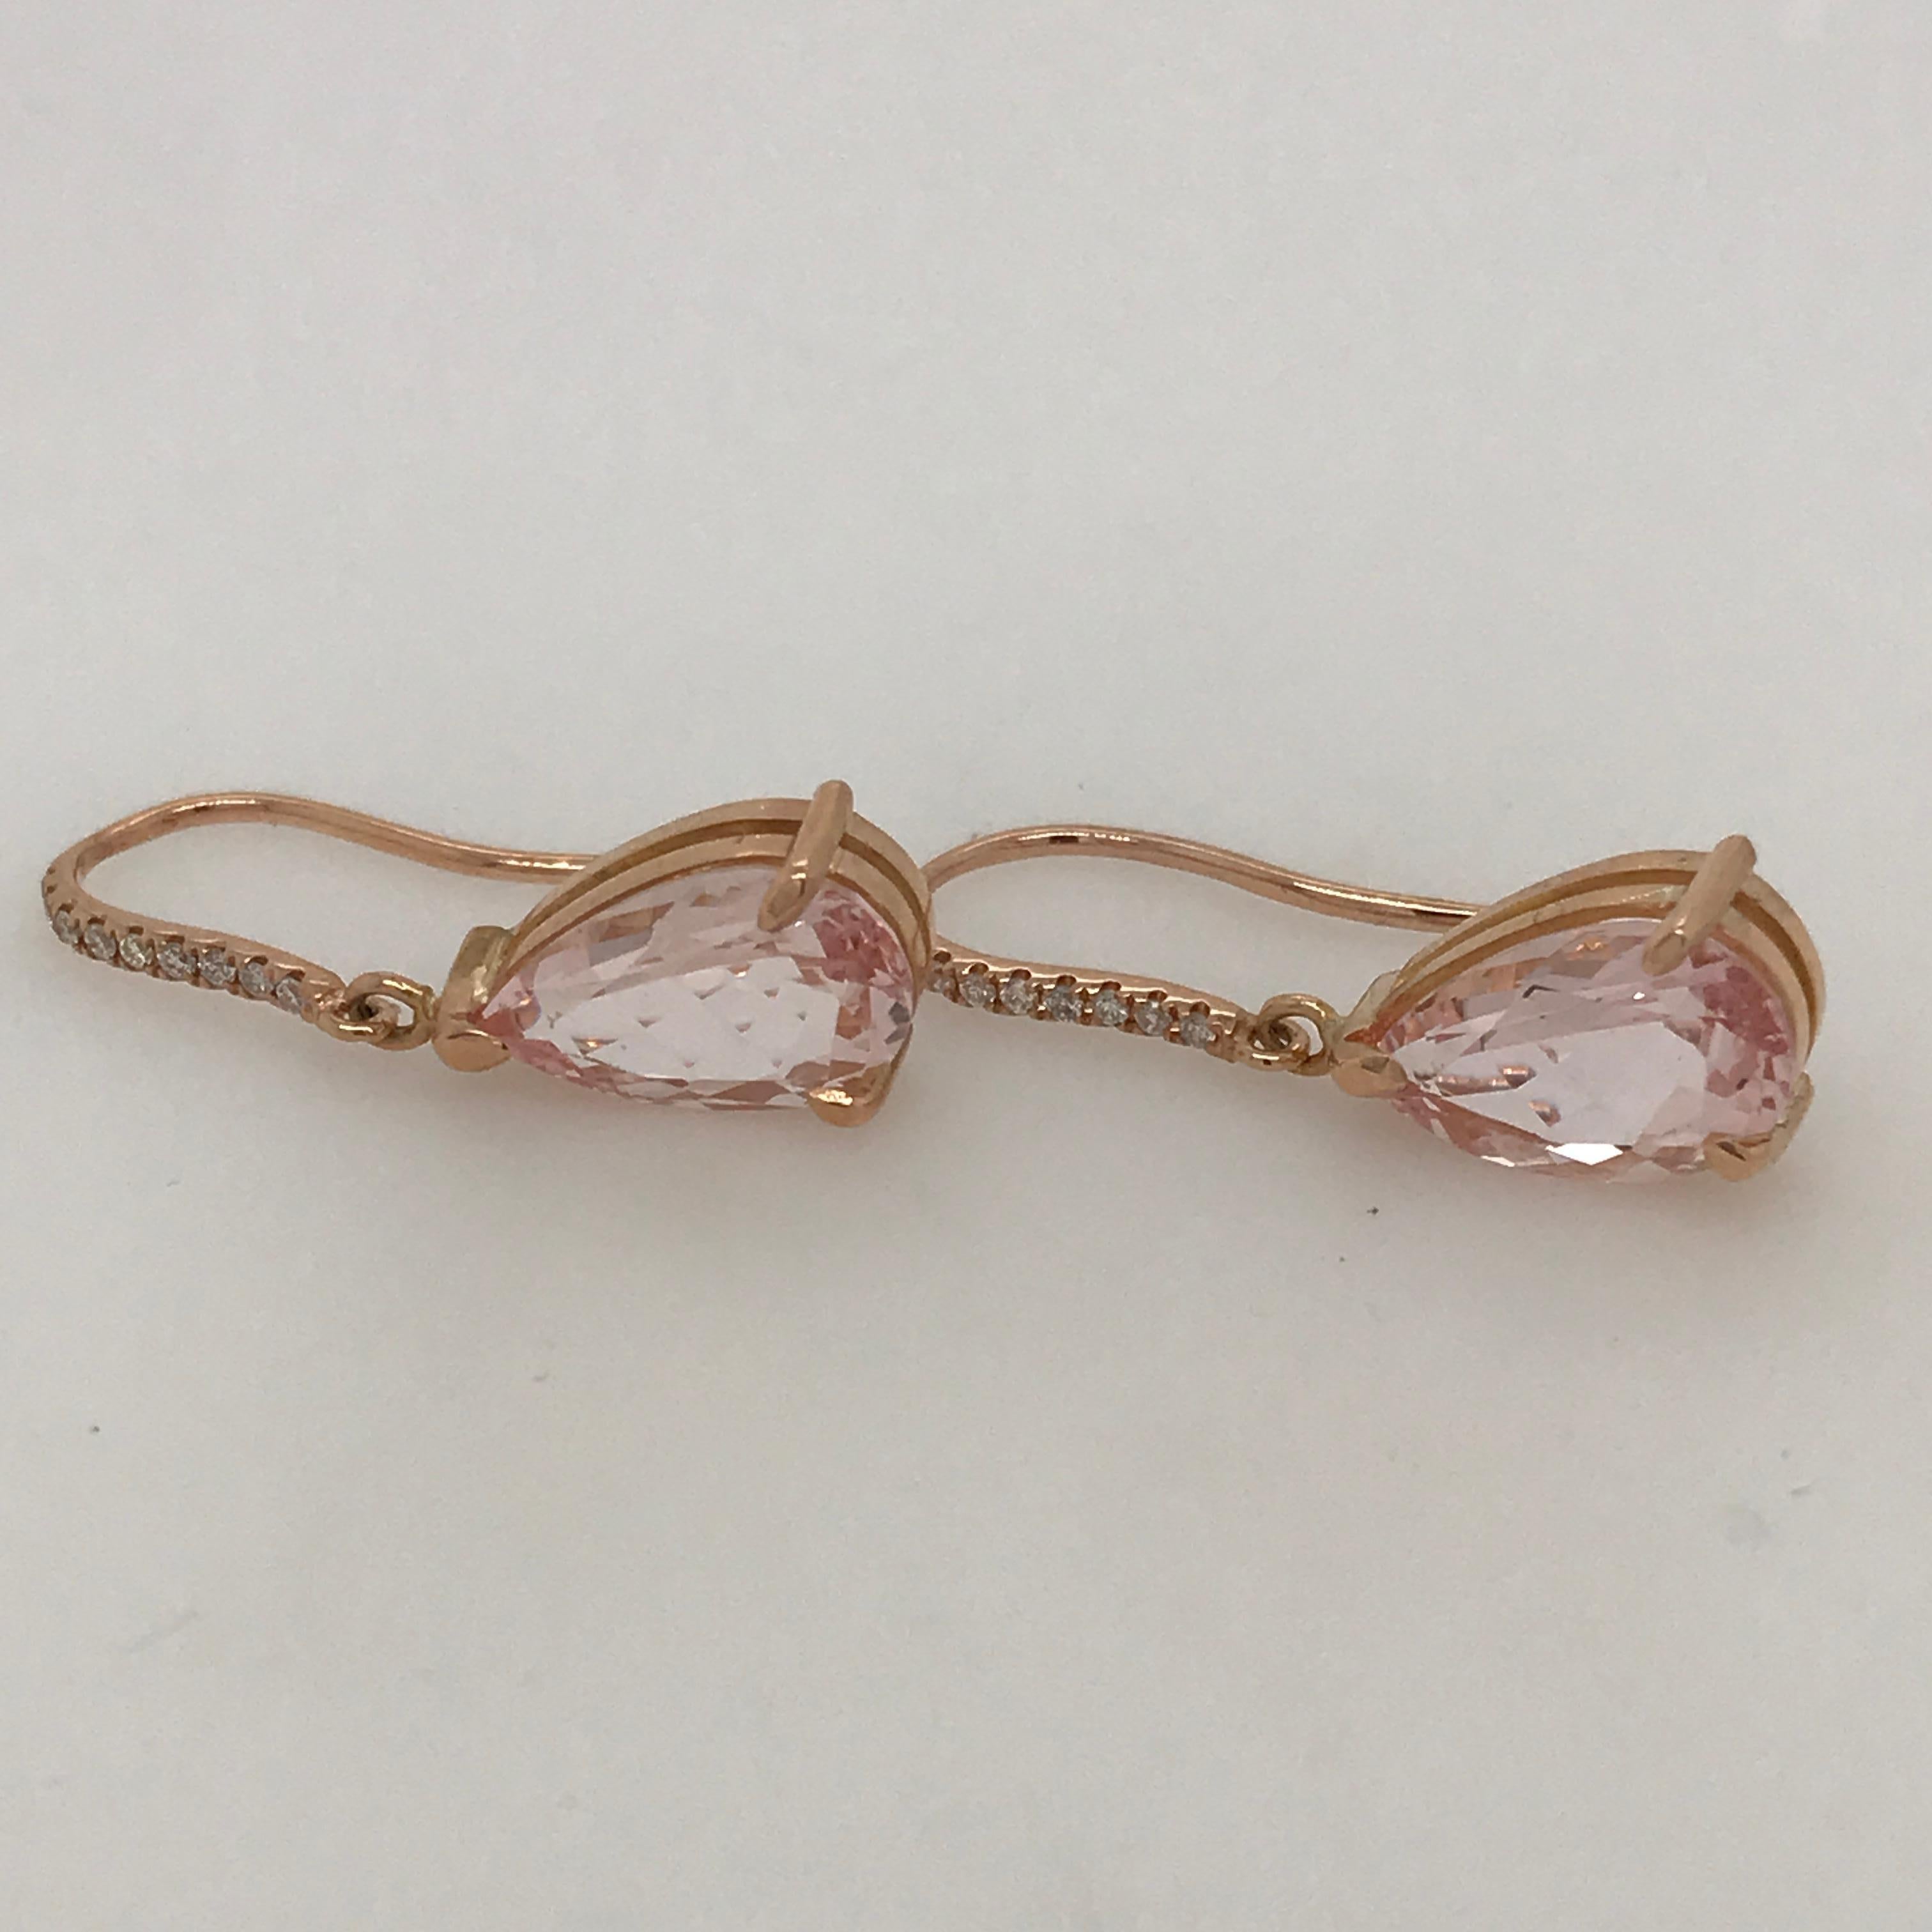 18ct rose gold pear shaped morganite and diamond drop earrings.
2 pear shaped morganites totalling 4.43ct and 18 brilliant cut diamonds totalling 0.10ct
The diamonds are claw set into the shepherds hooks and the morganites are set in 3 claw setting